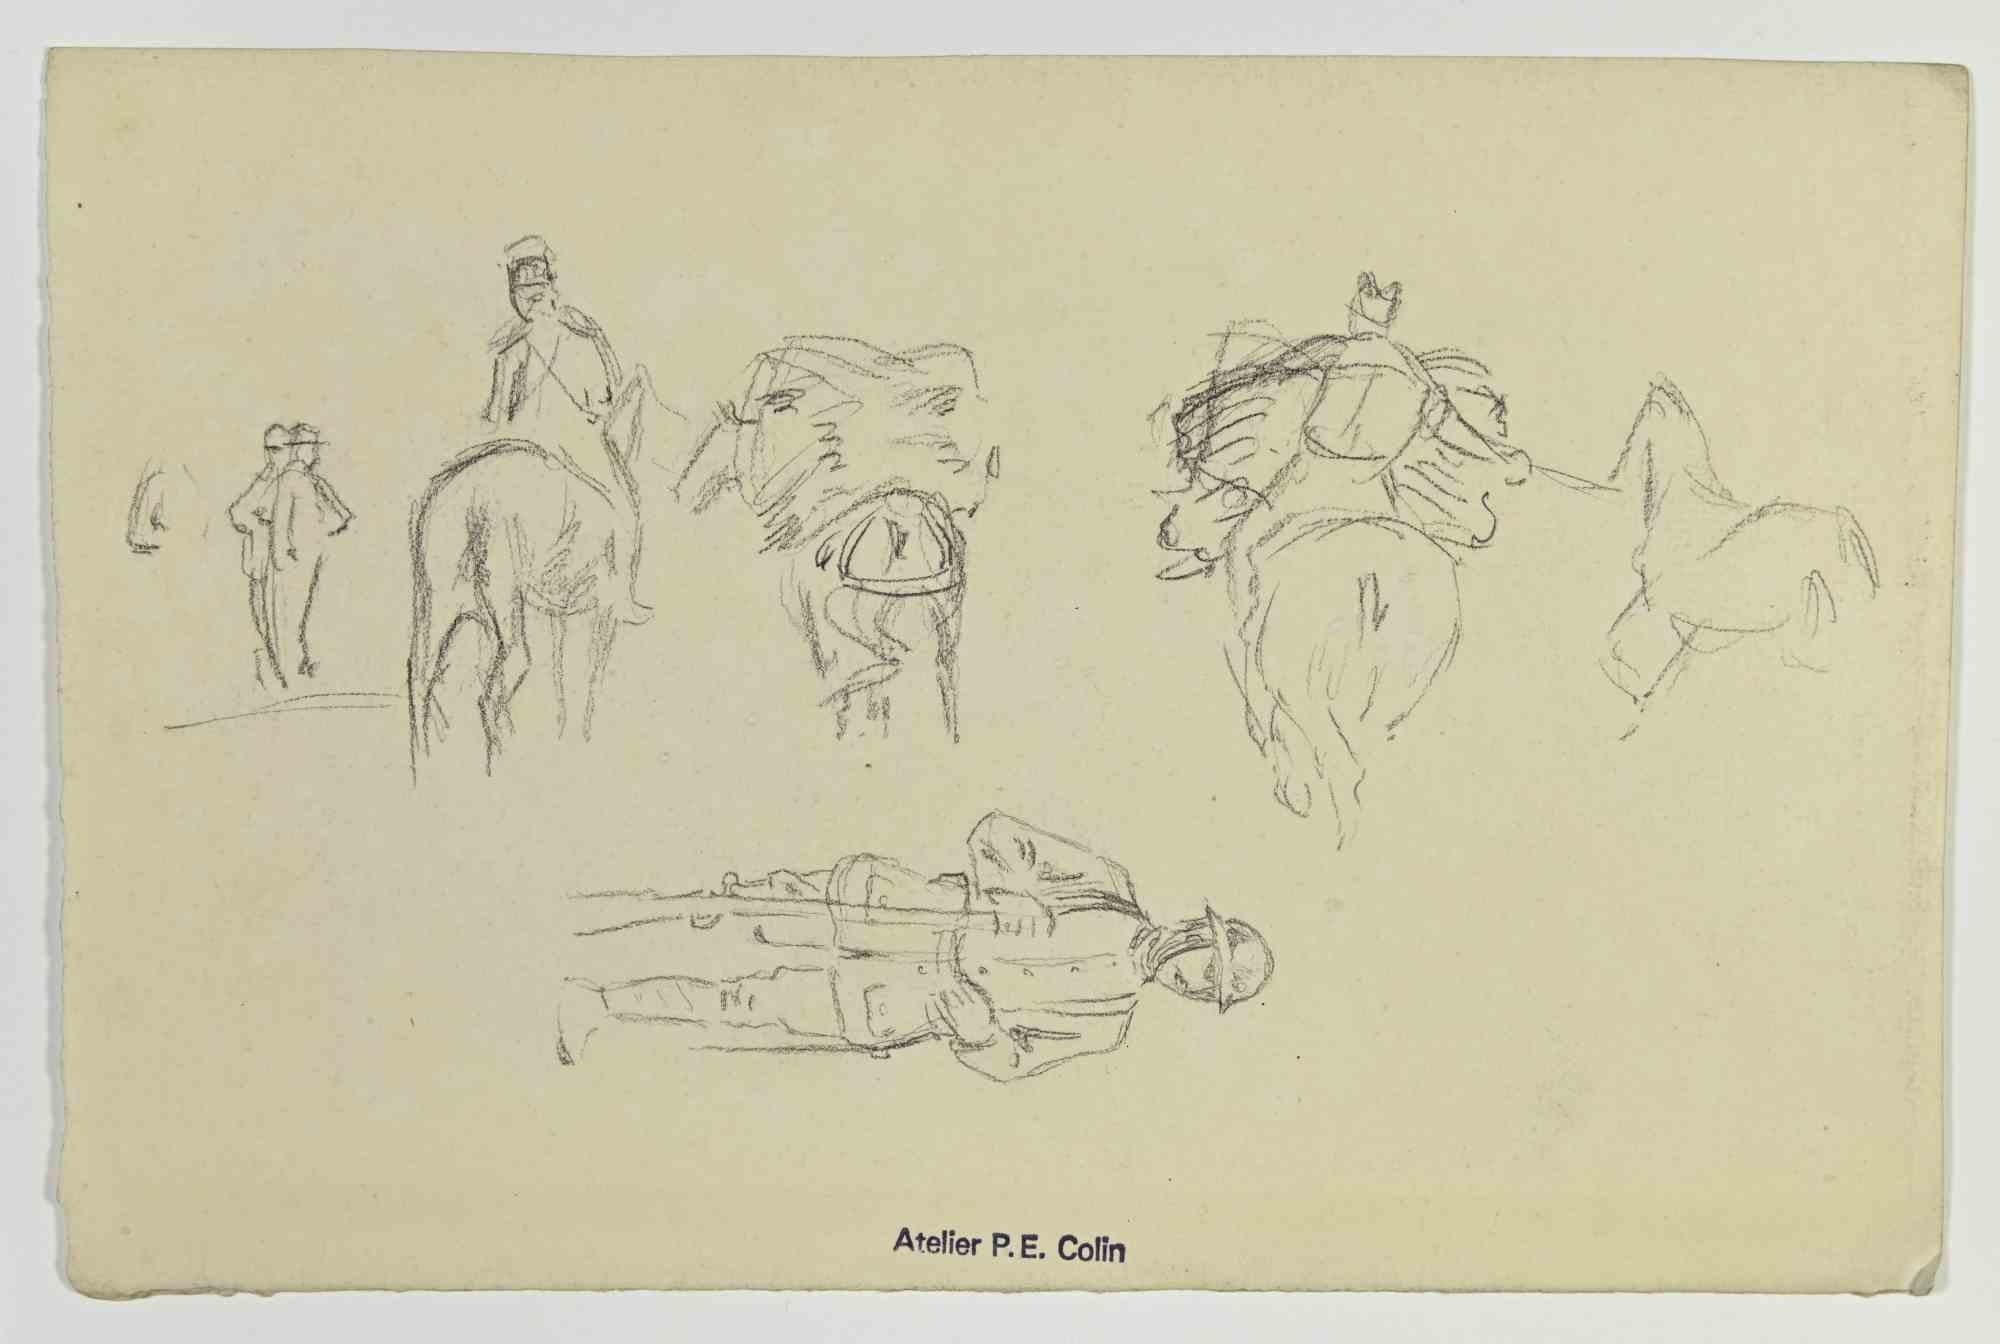 Soldiers is a drawing realized by Paul Emile Colin in the Early 20th Century.

Carbon Pencil on ivory-colored paper

Stamped on the lower.

Good conditions with slight foxing.

The artwork is realized through deft expressive strokes.